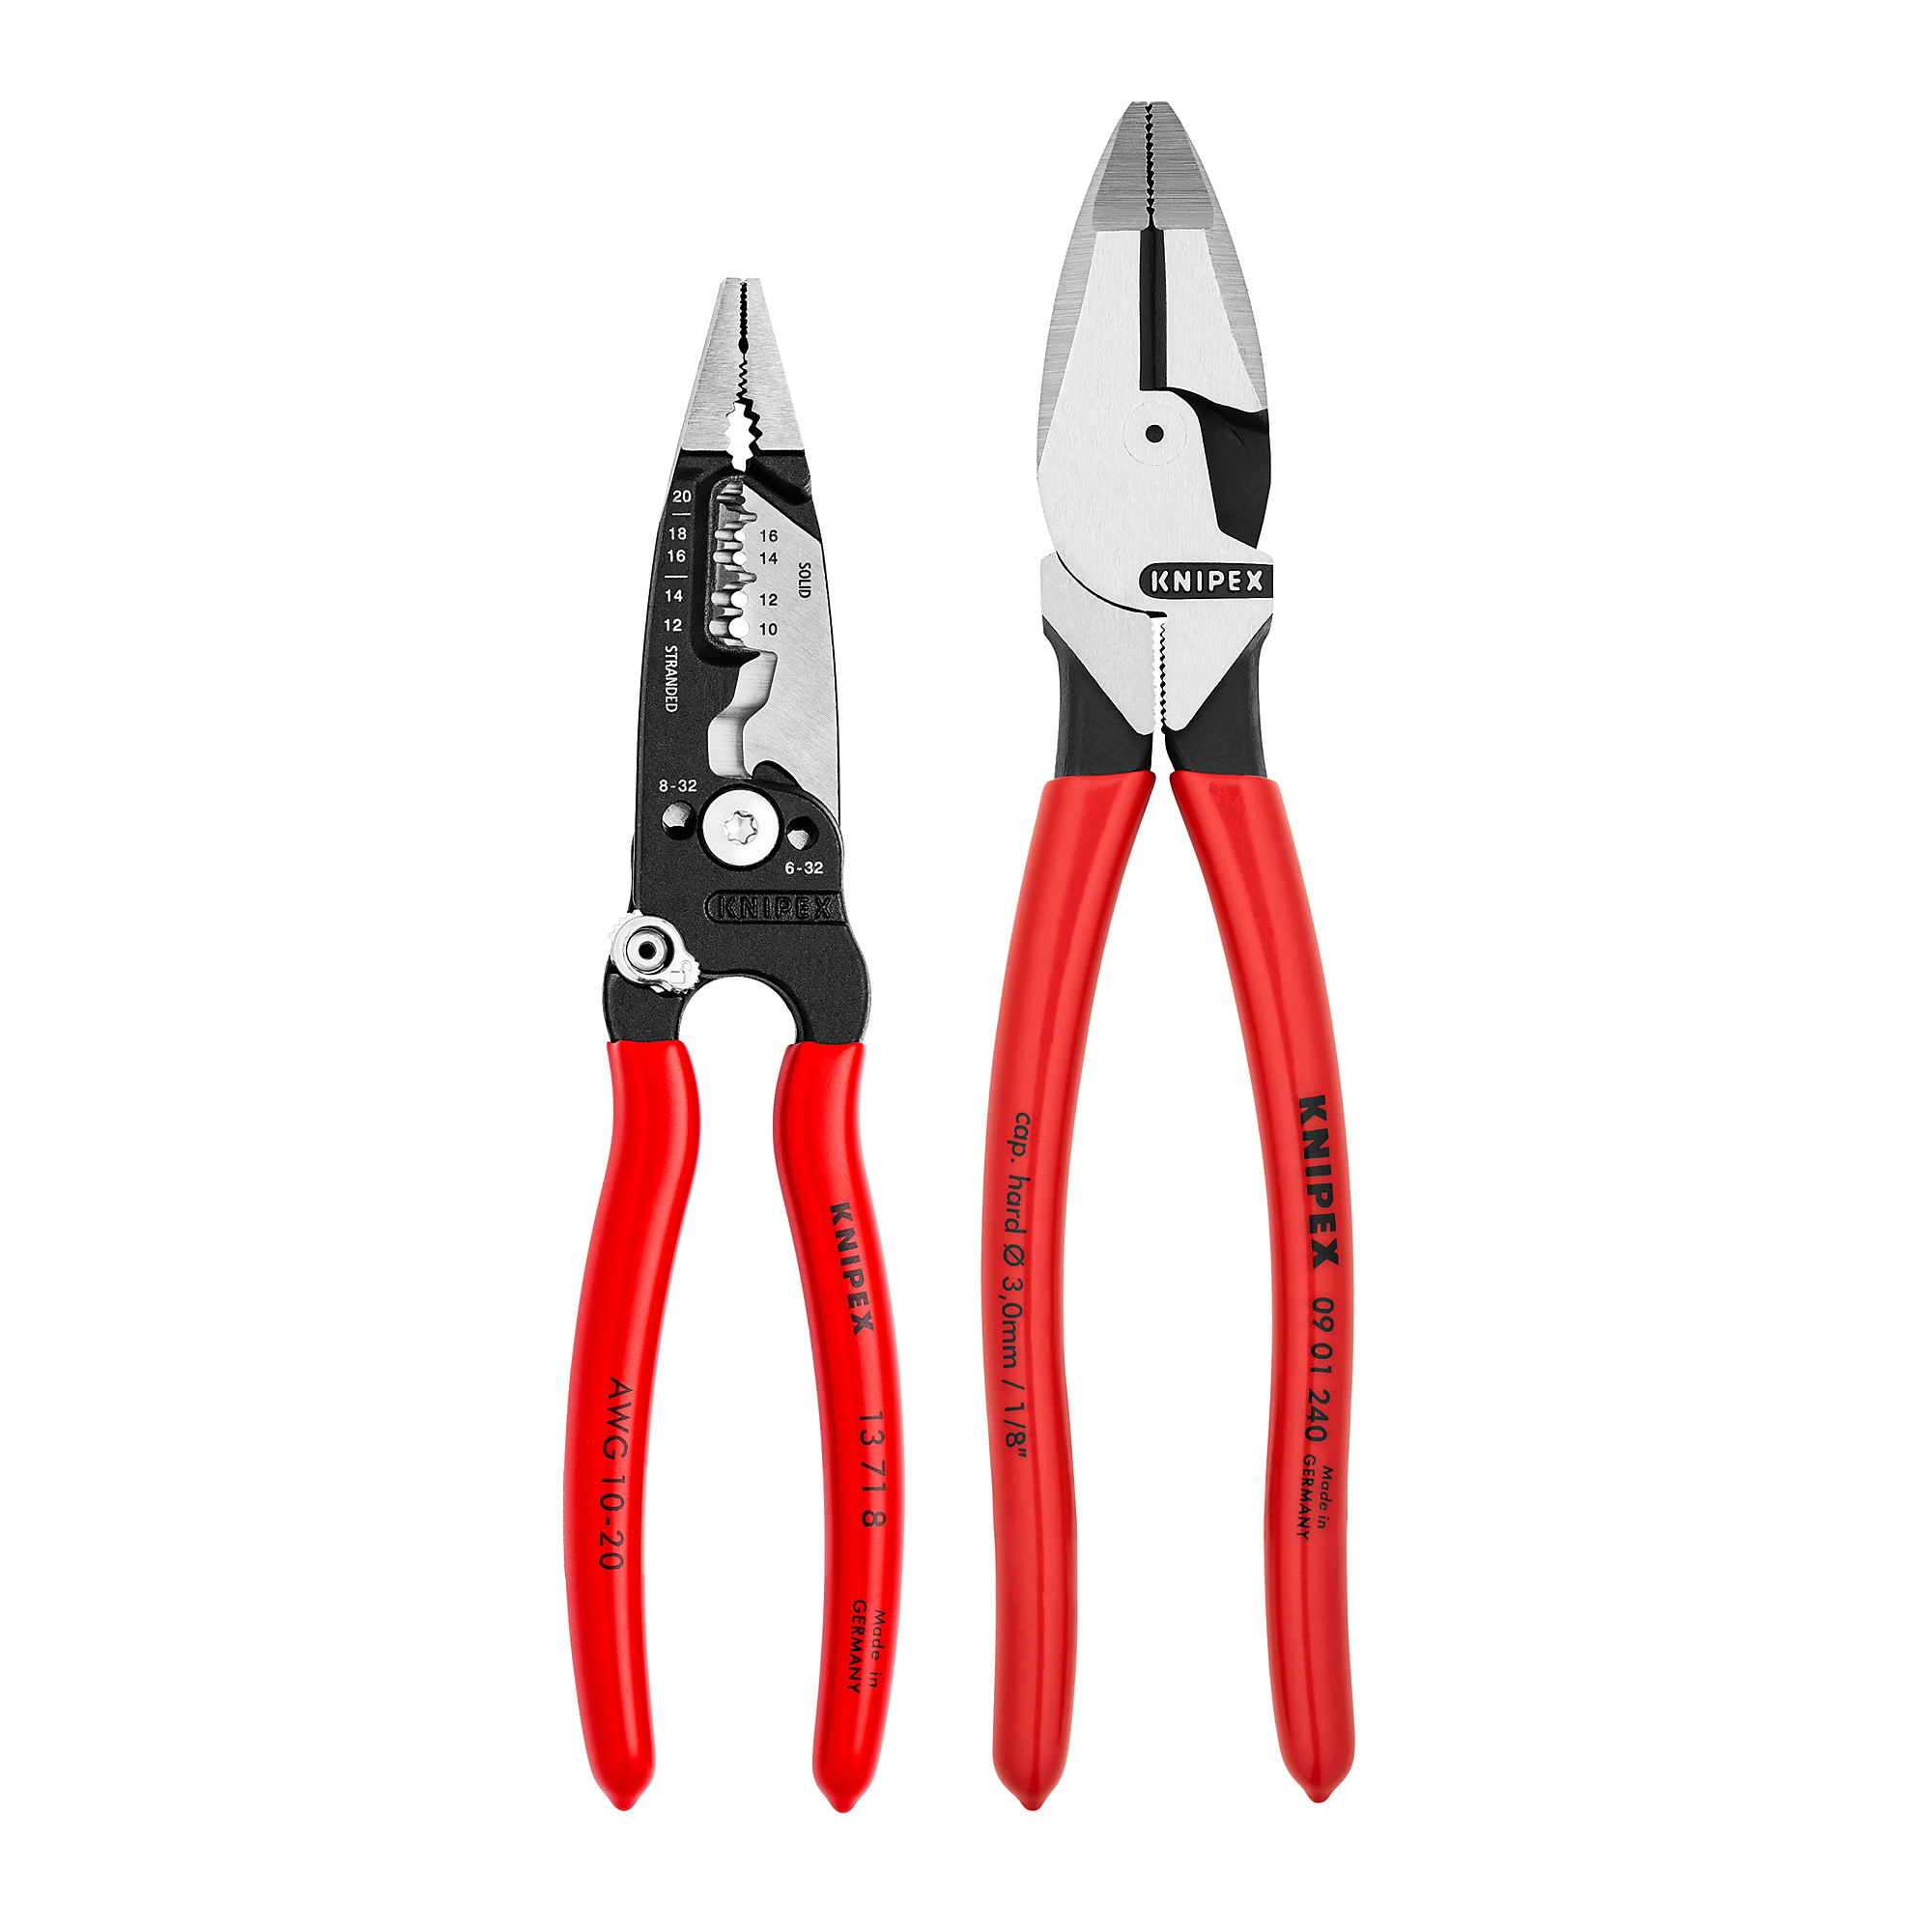 KNIPEX, Electrical Set, 2 Pc, Pieces (qty.) 2 Material Steel, Model 9K 00 80 148 US